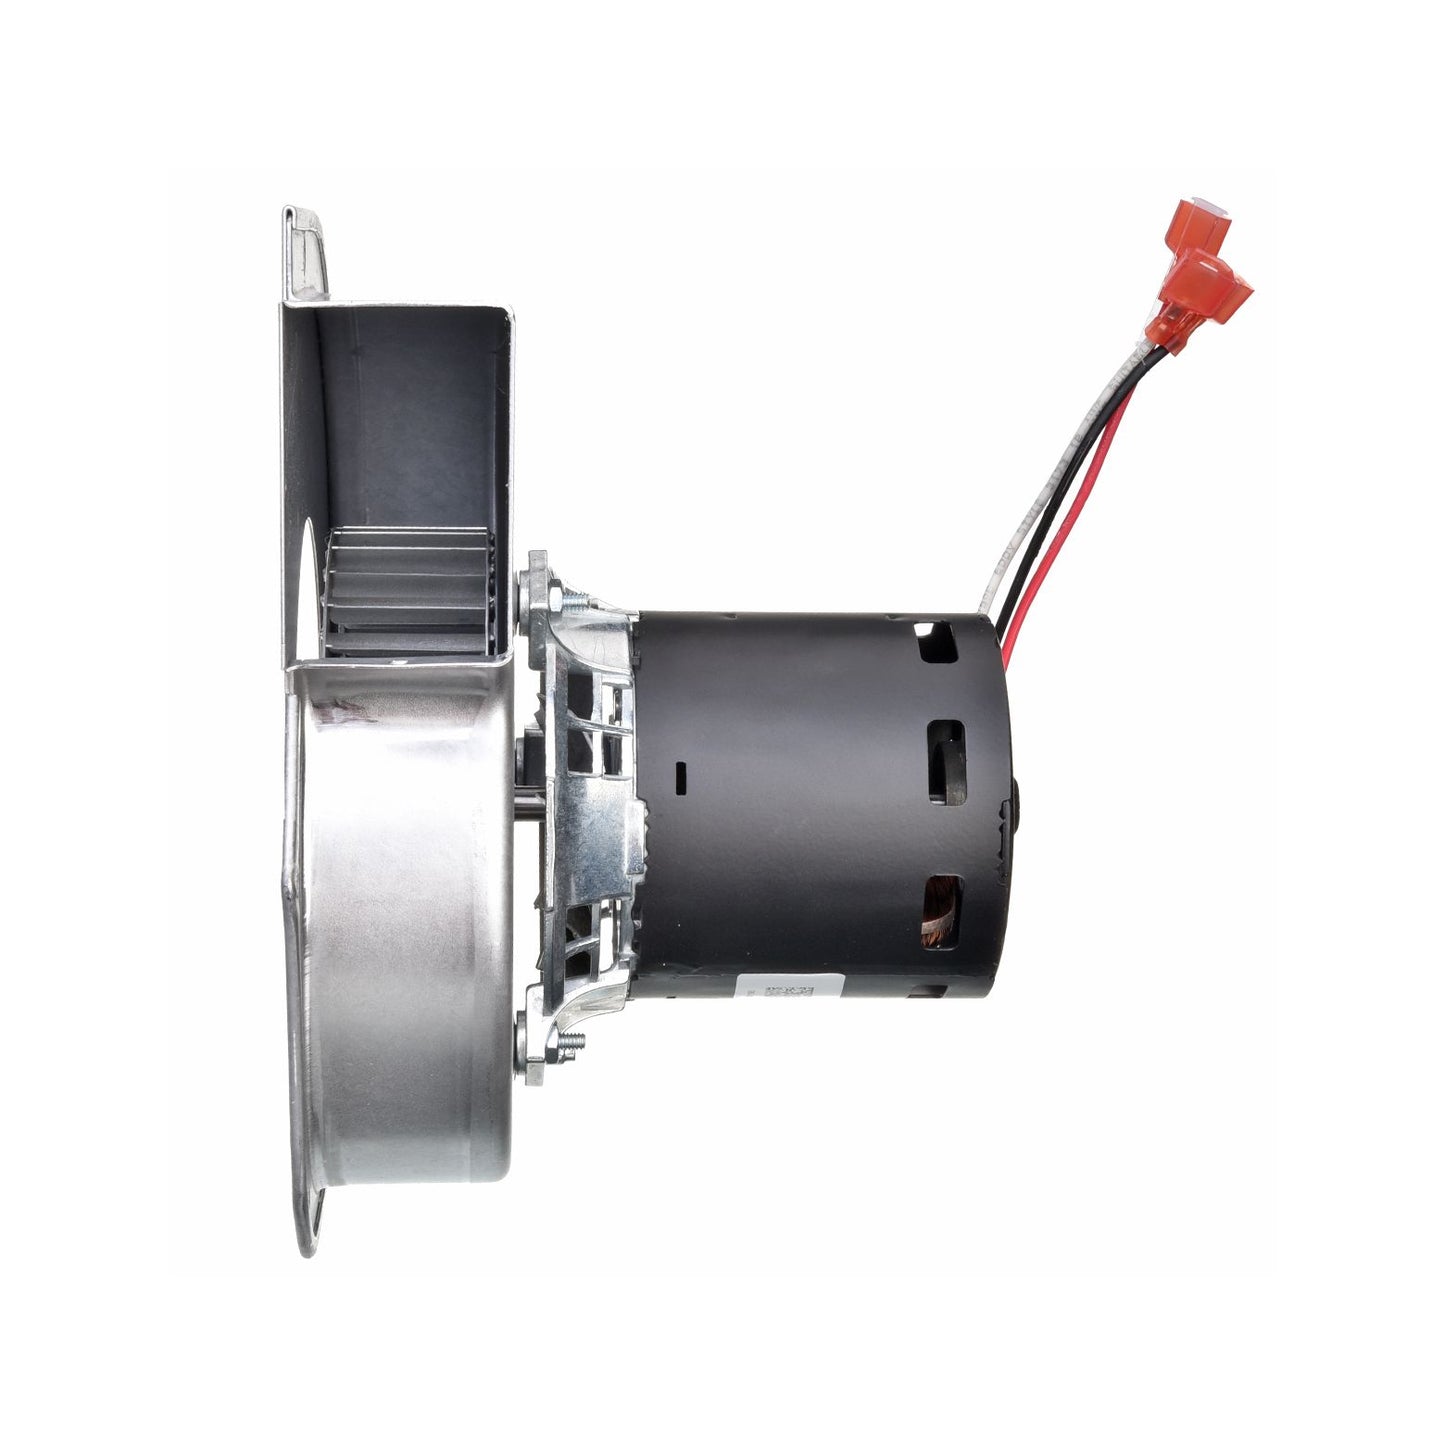 70-23641-86 - Induced Draft Blower with Gasket - 230V